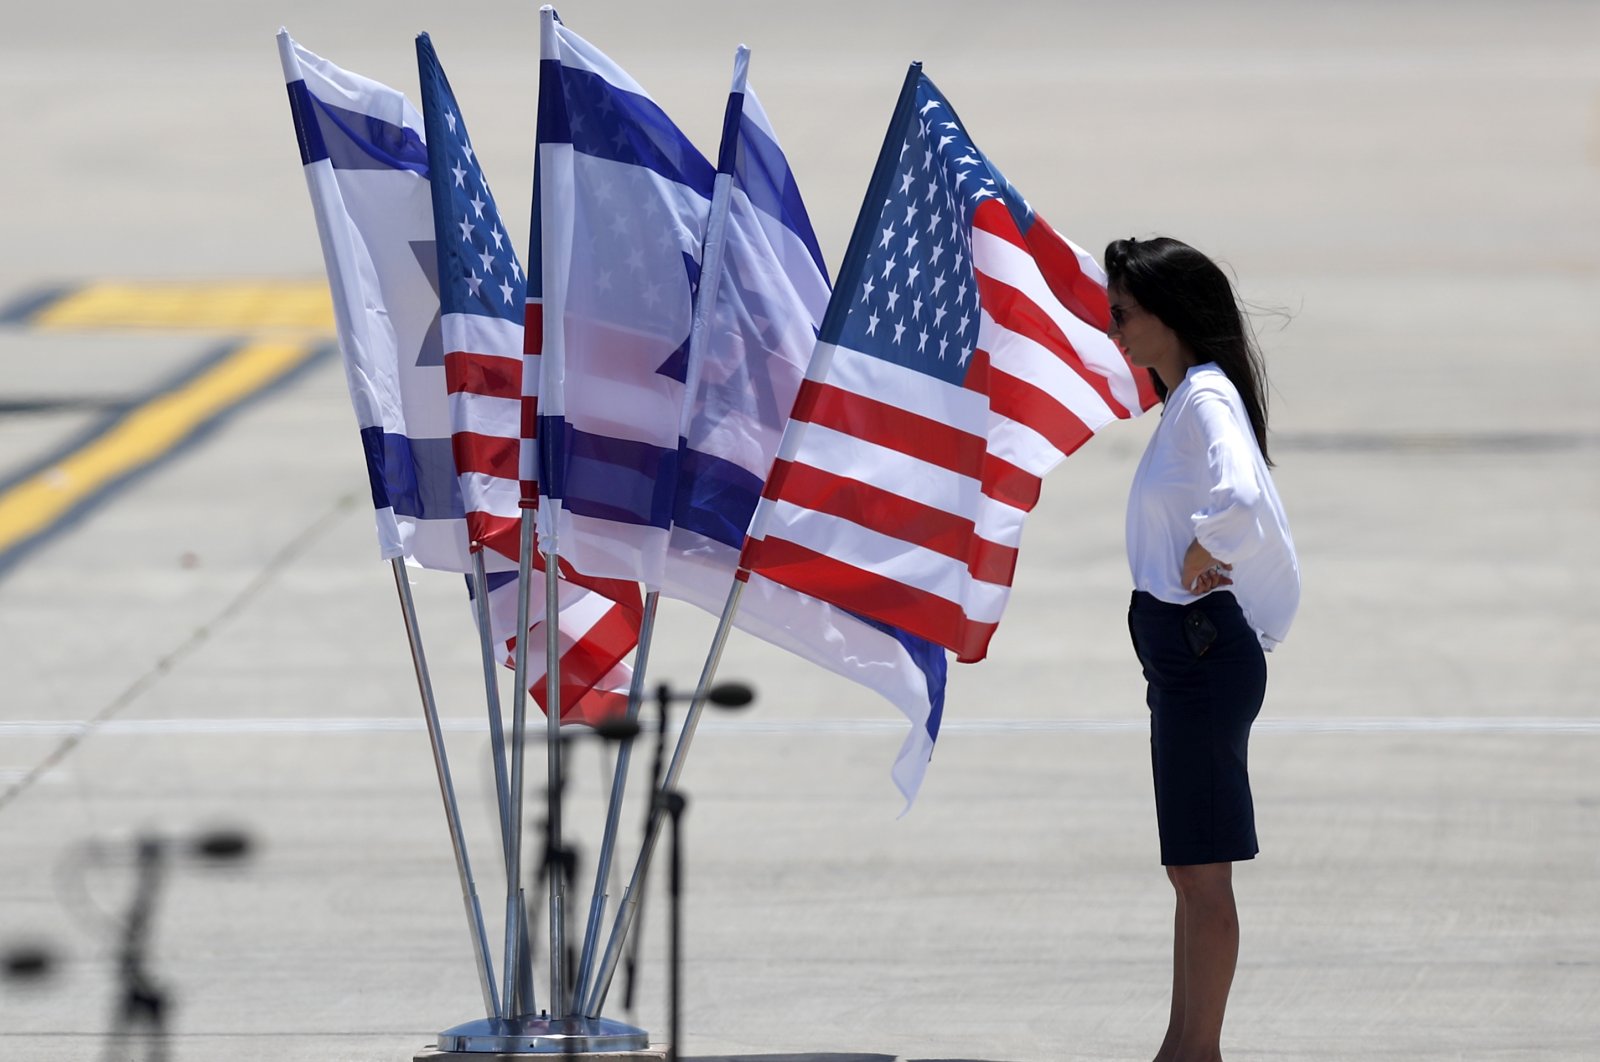 An official stands near a display of U.S. and Israeli flags at Ben Gurion Airport ahead of the arrival of U.S. President Joe Biden, Lod, near Tel Aviv, Israel, July 13, 2022. (EPA Photo)